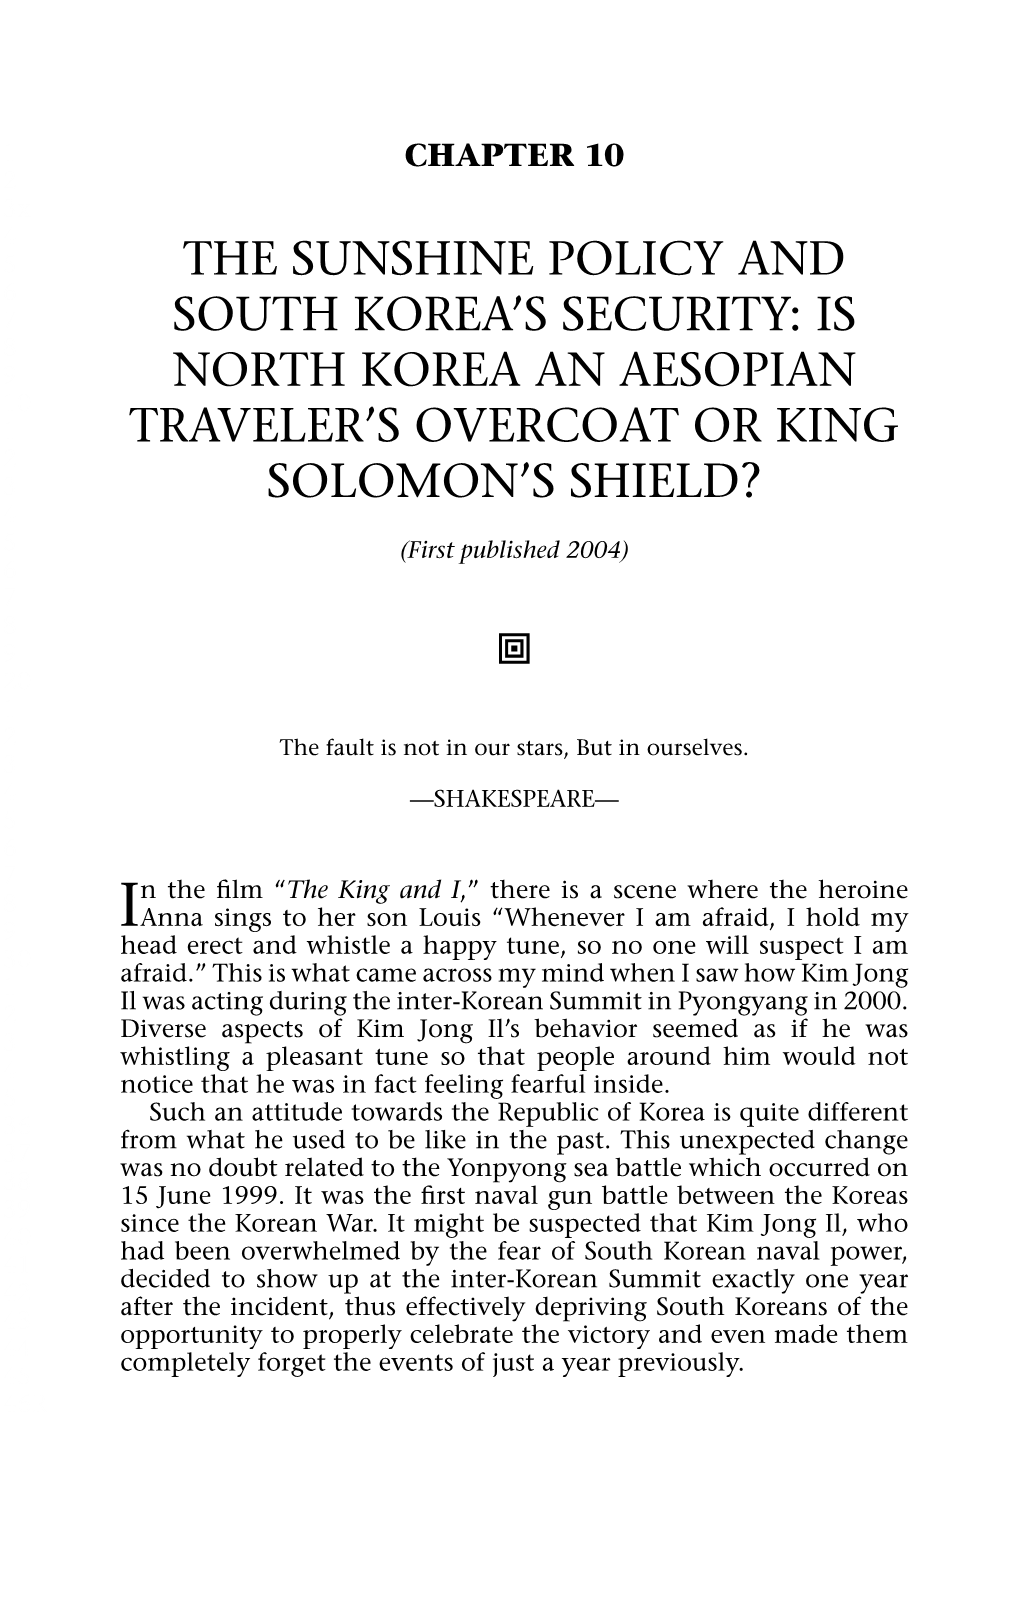 The Sunshine Policy and South Korea's Security: Is